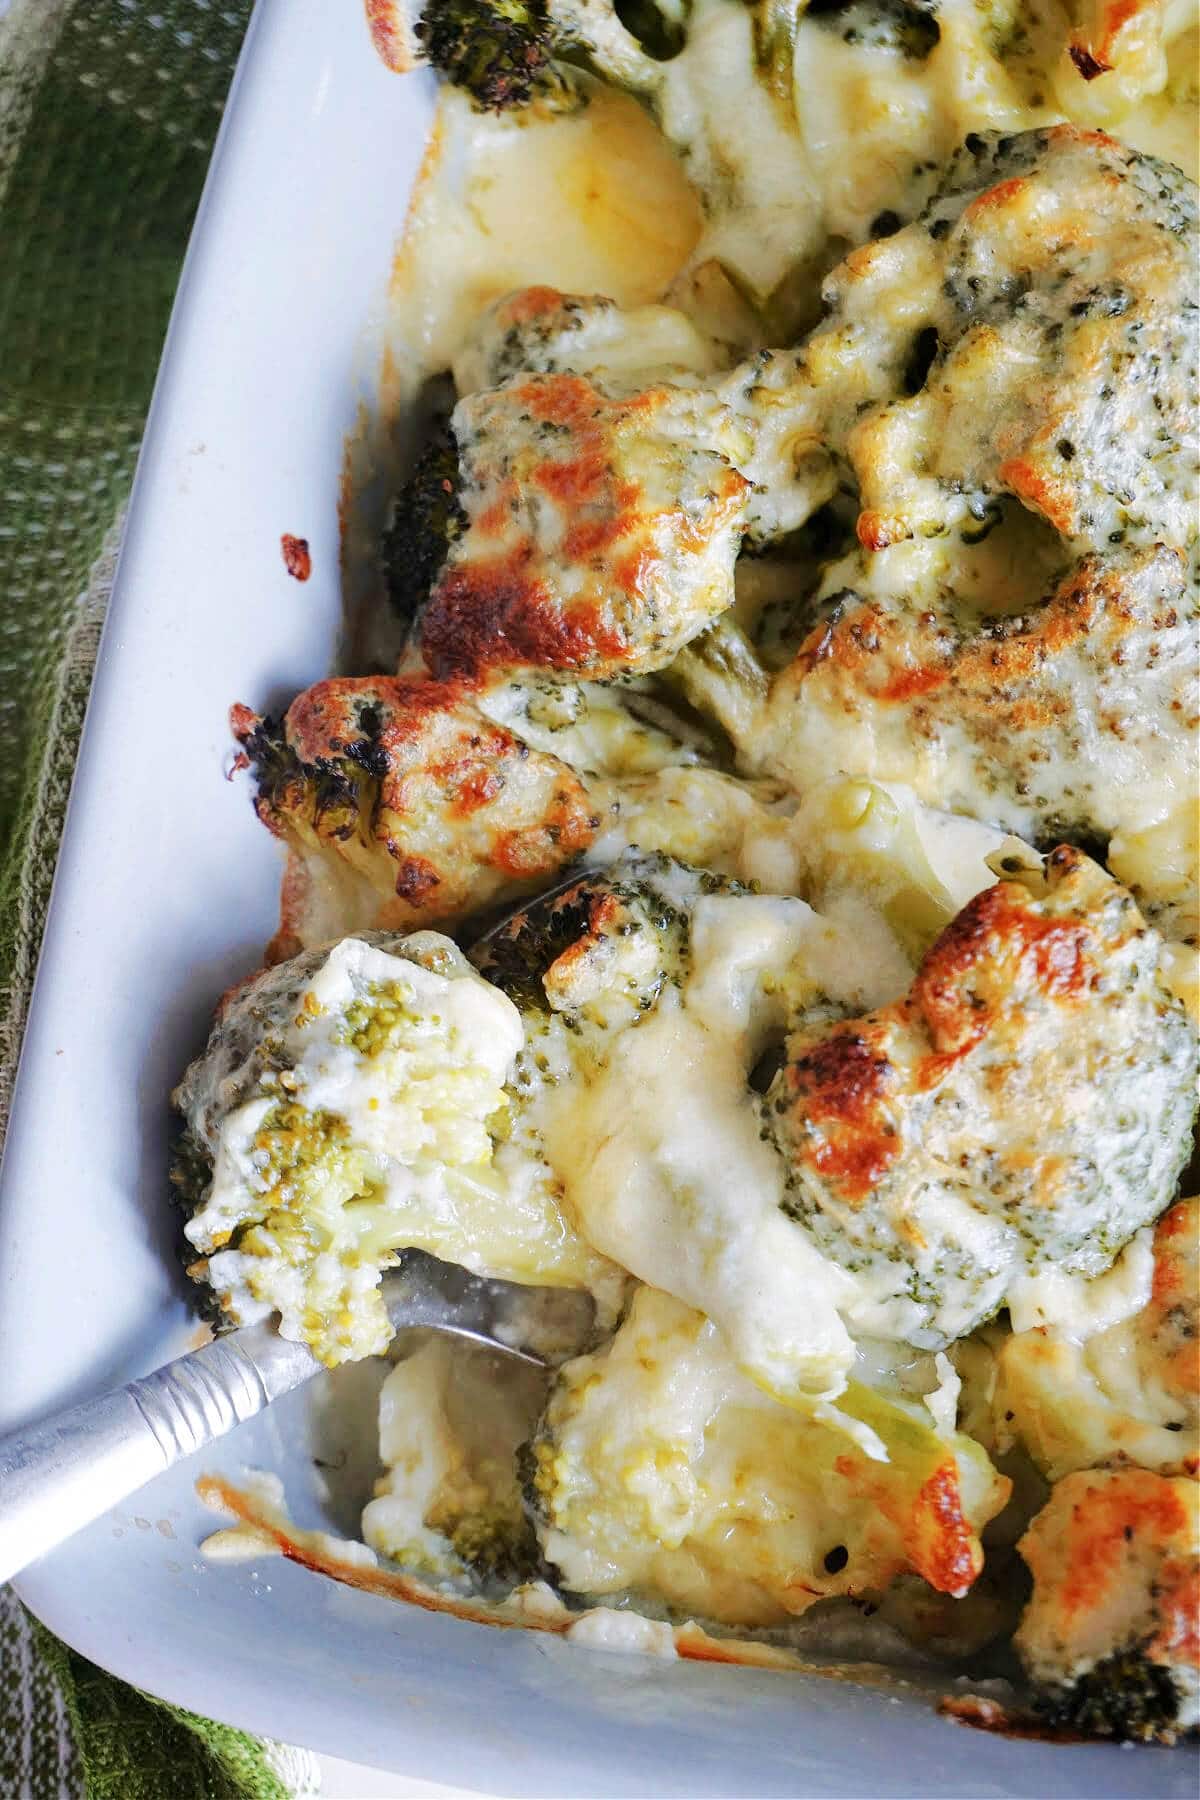 A dish with broccoli cheese.